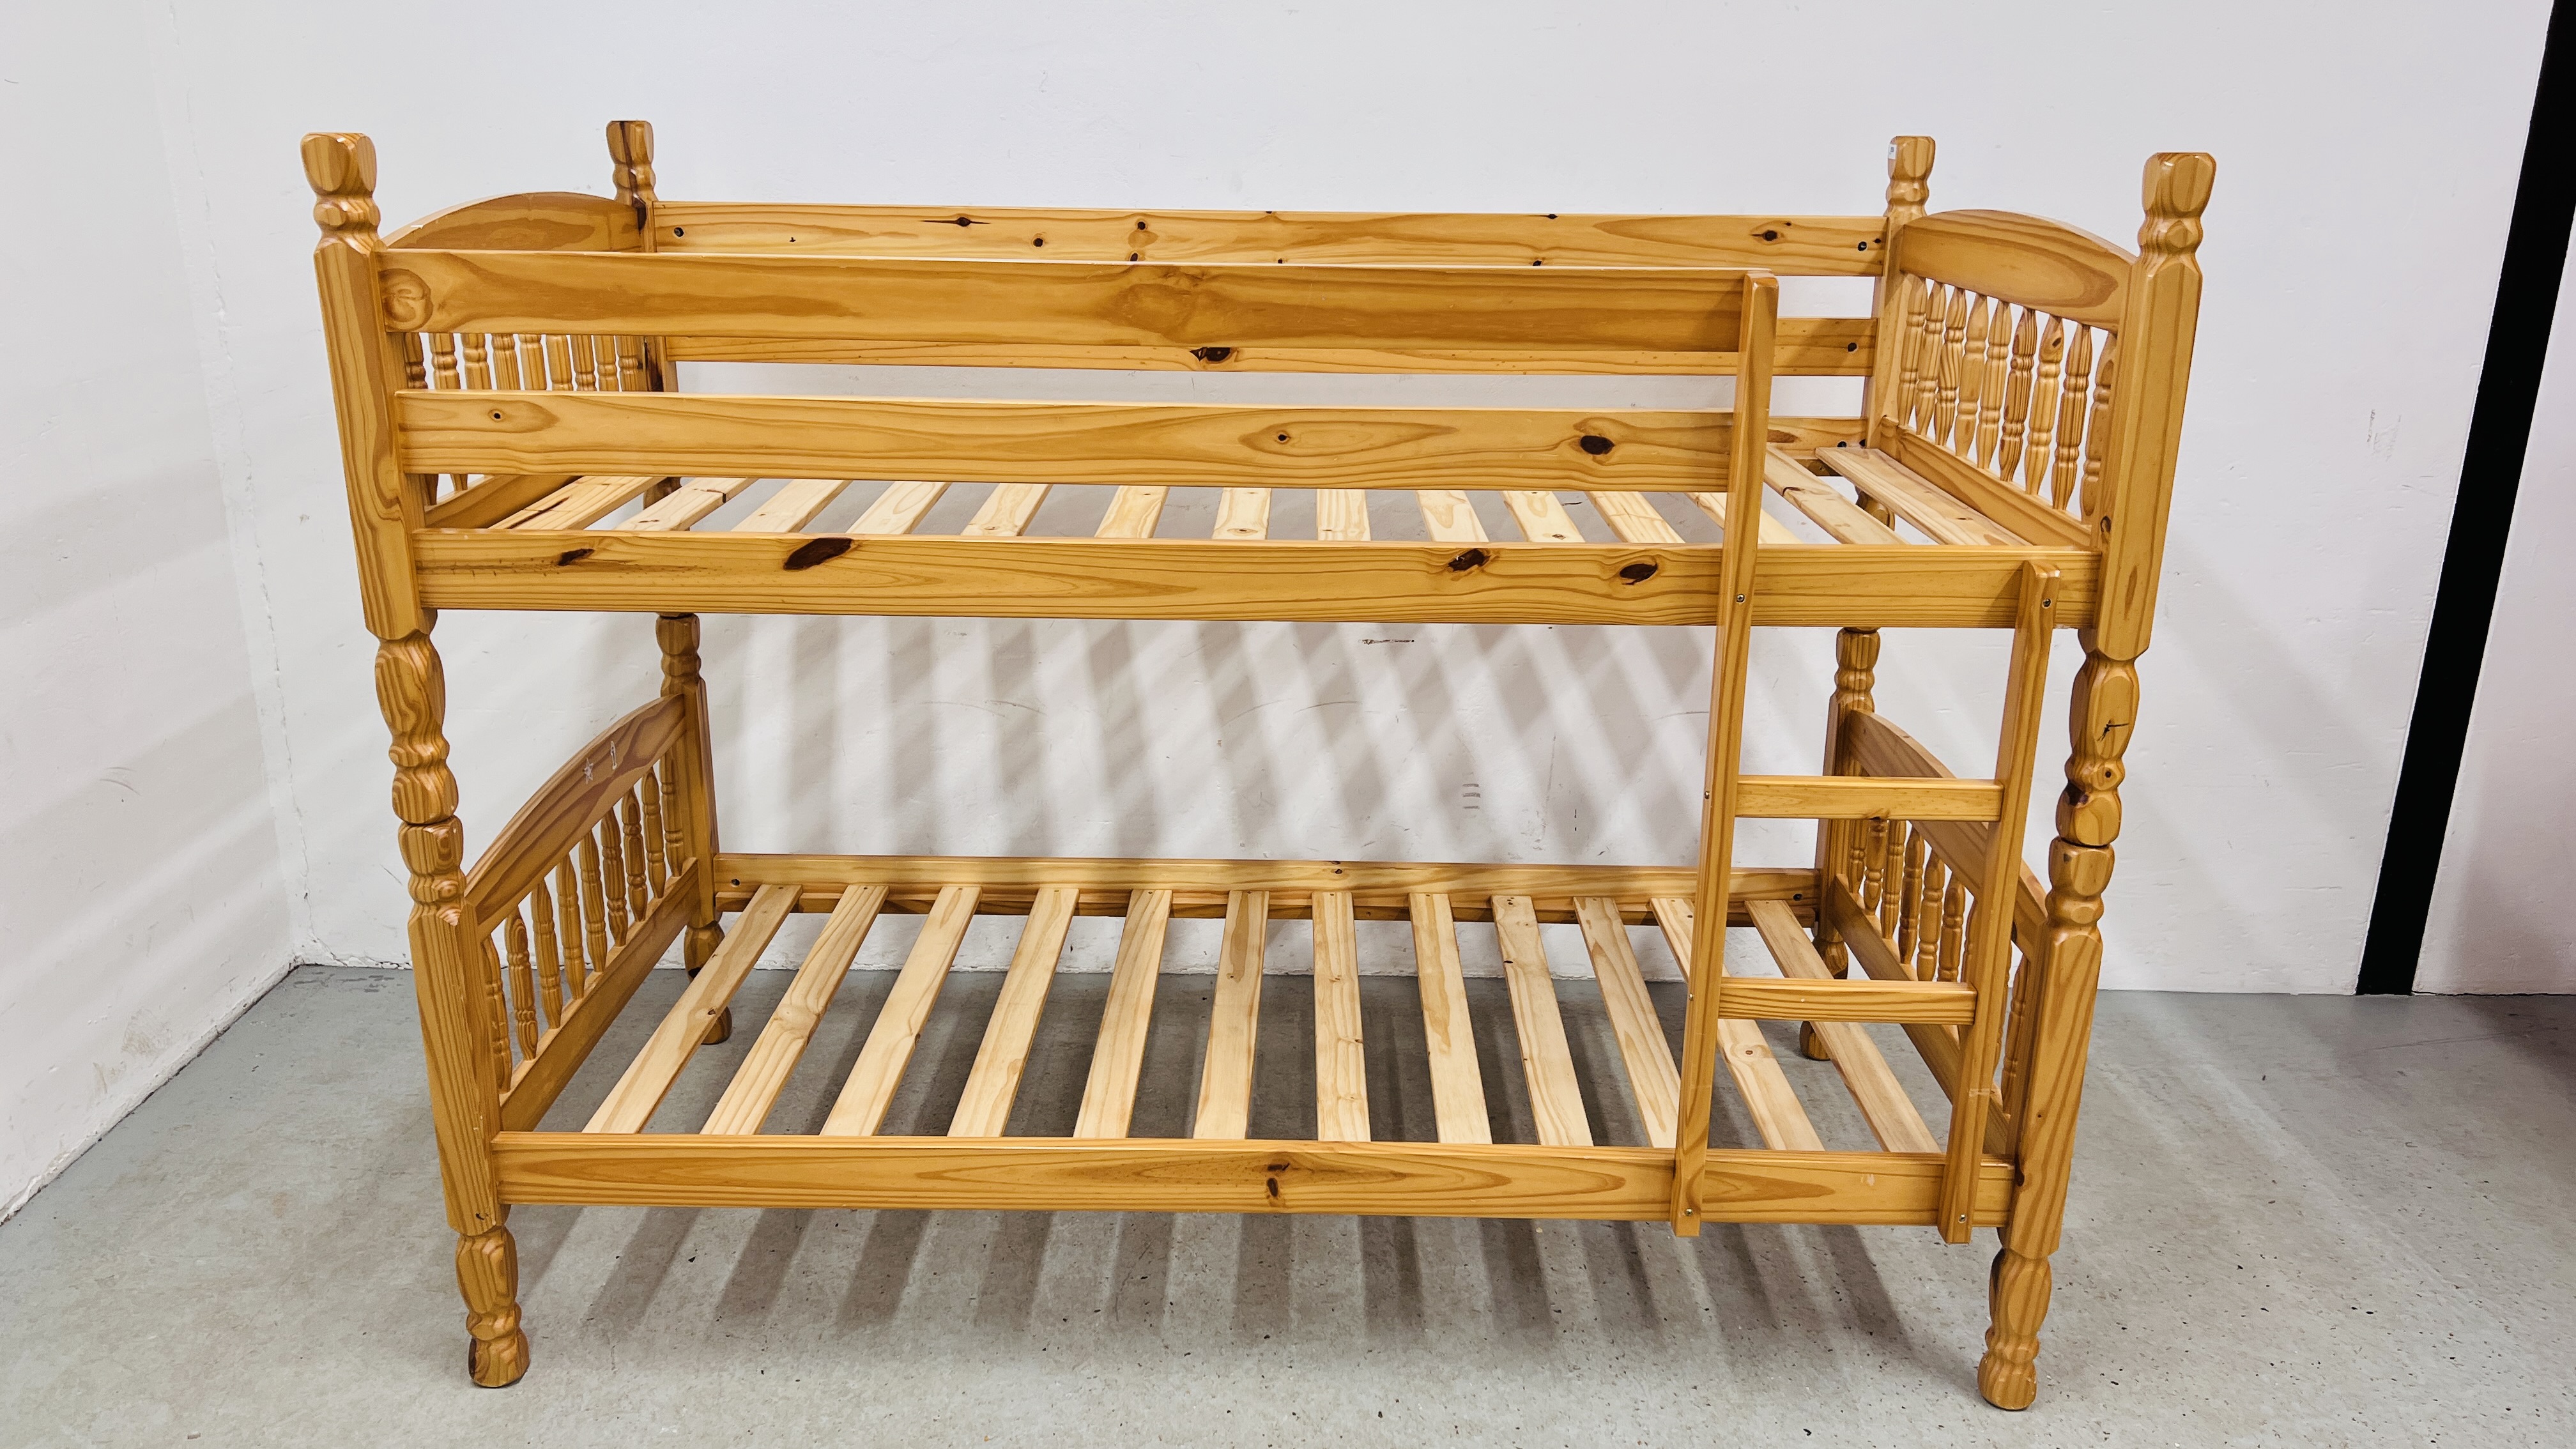 A PINE FRAME BUNK BED - Image 2 of 11